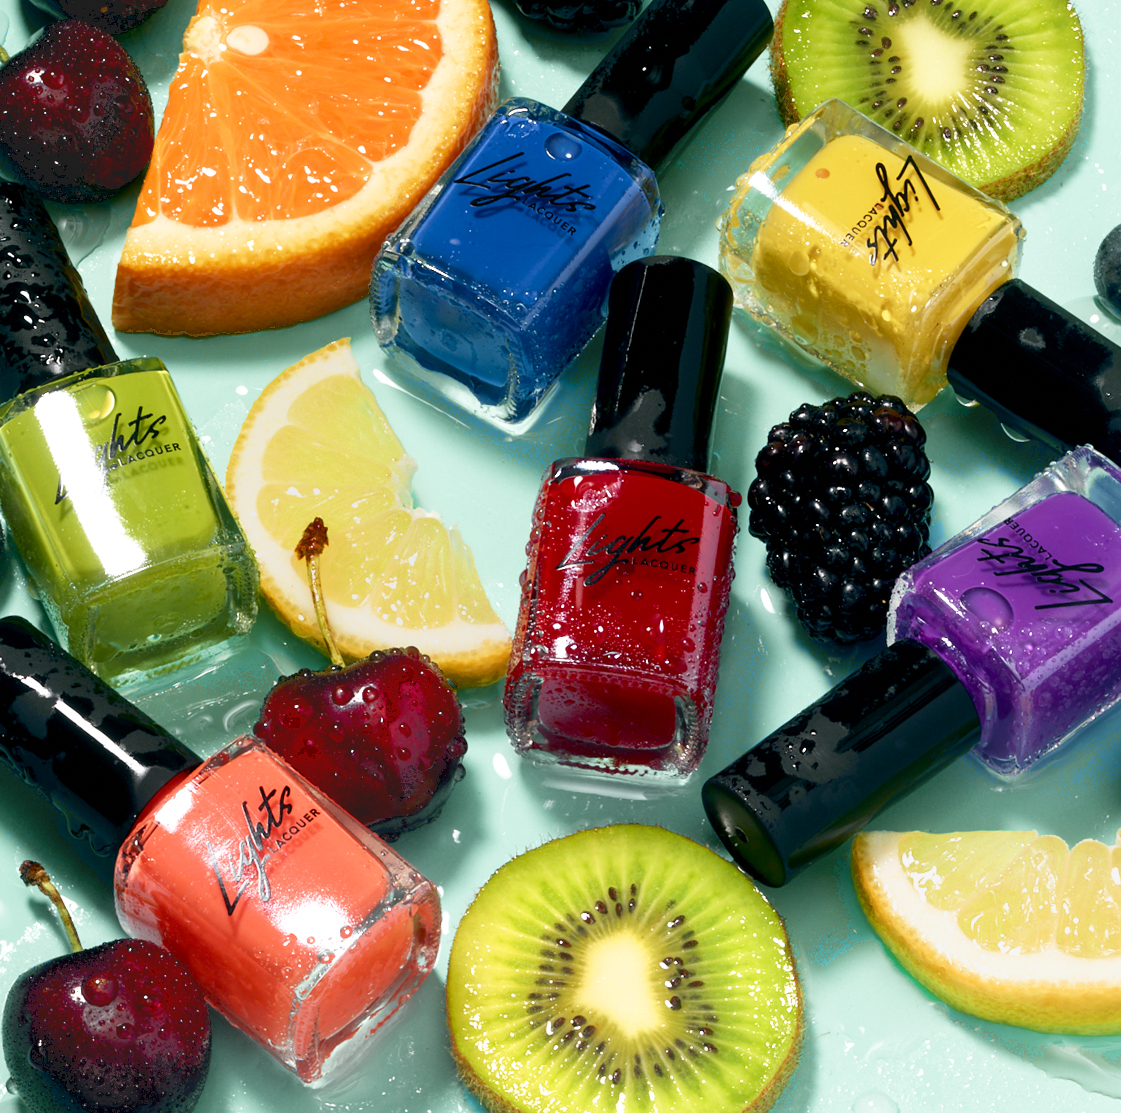 ” Sweet As Summer” a collection of bright & vibrant colors by Lights Lacquer.